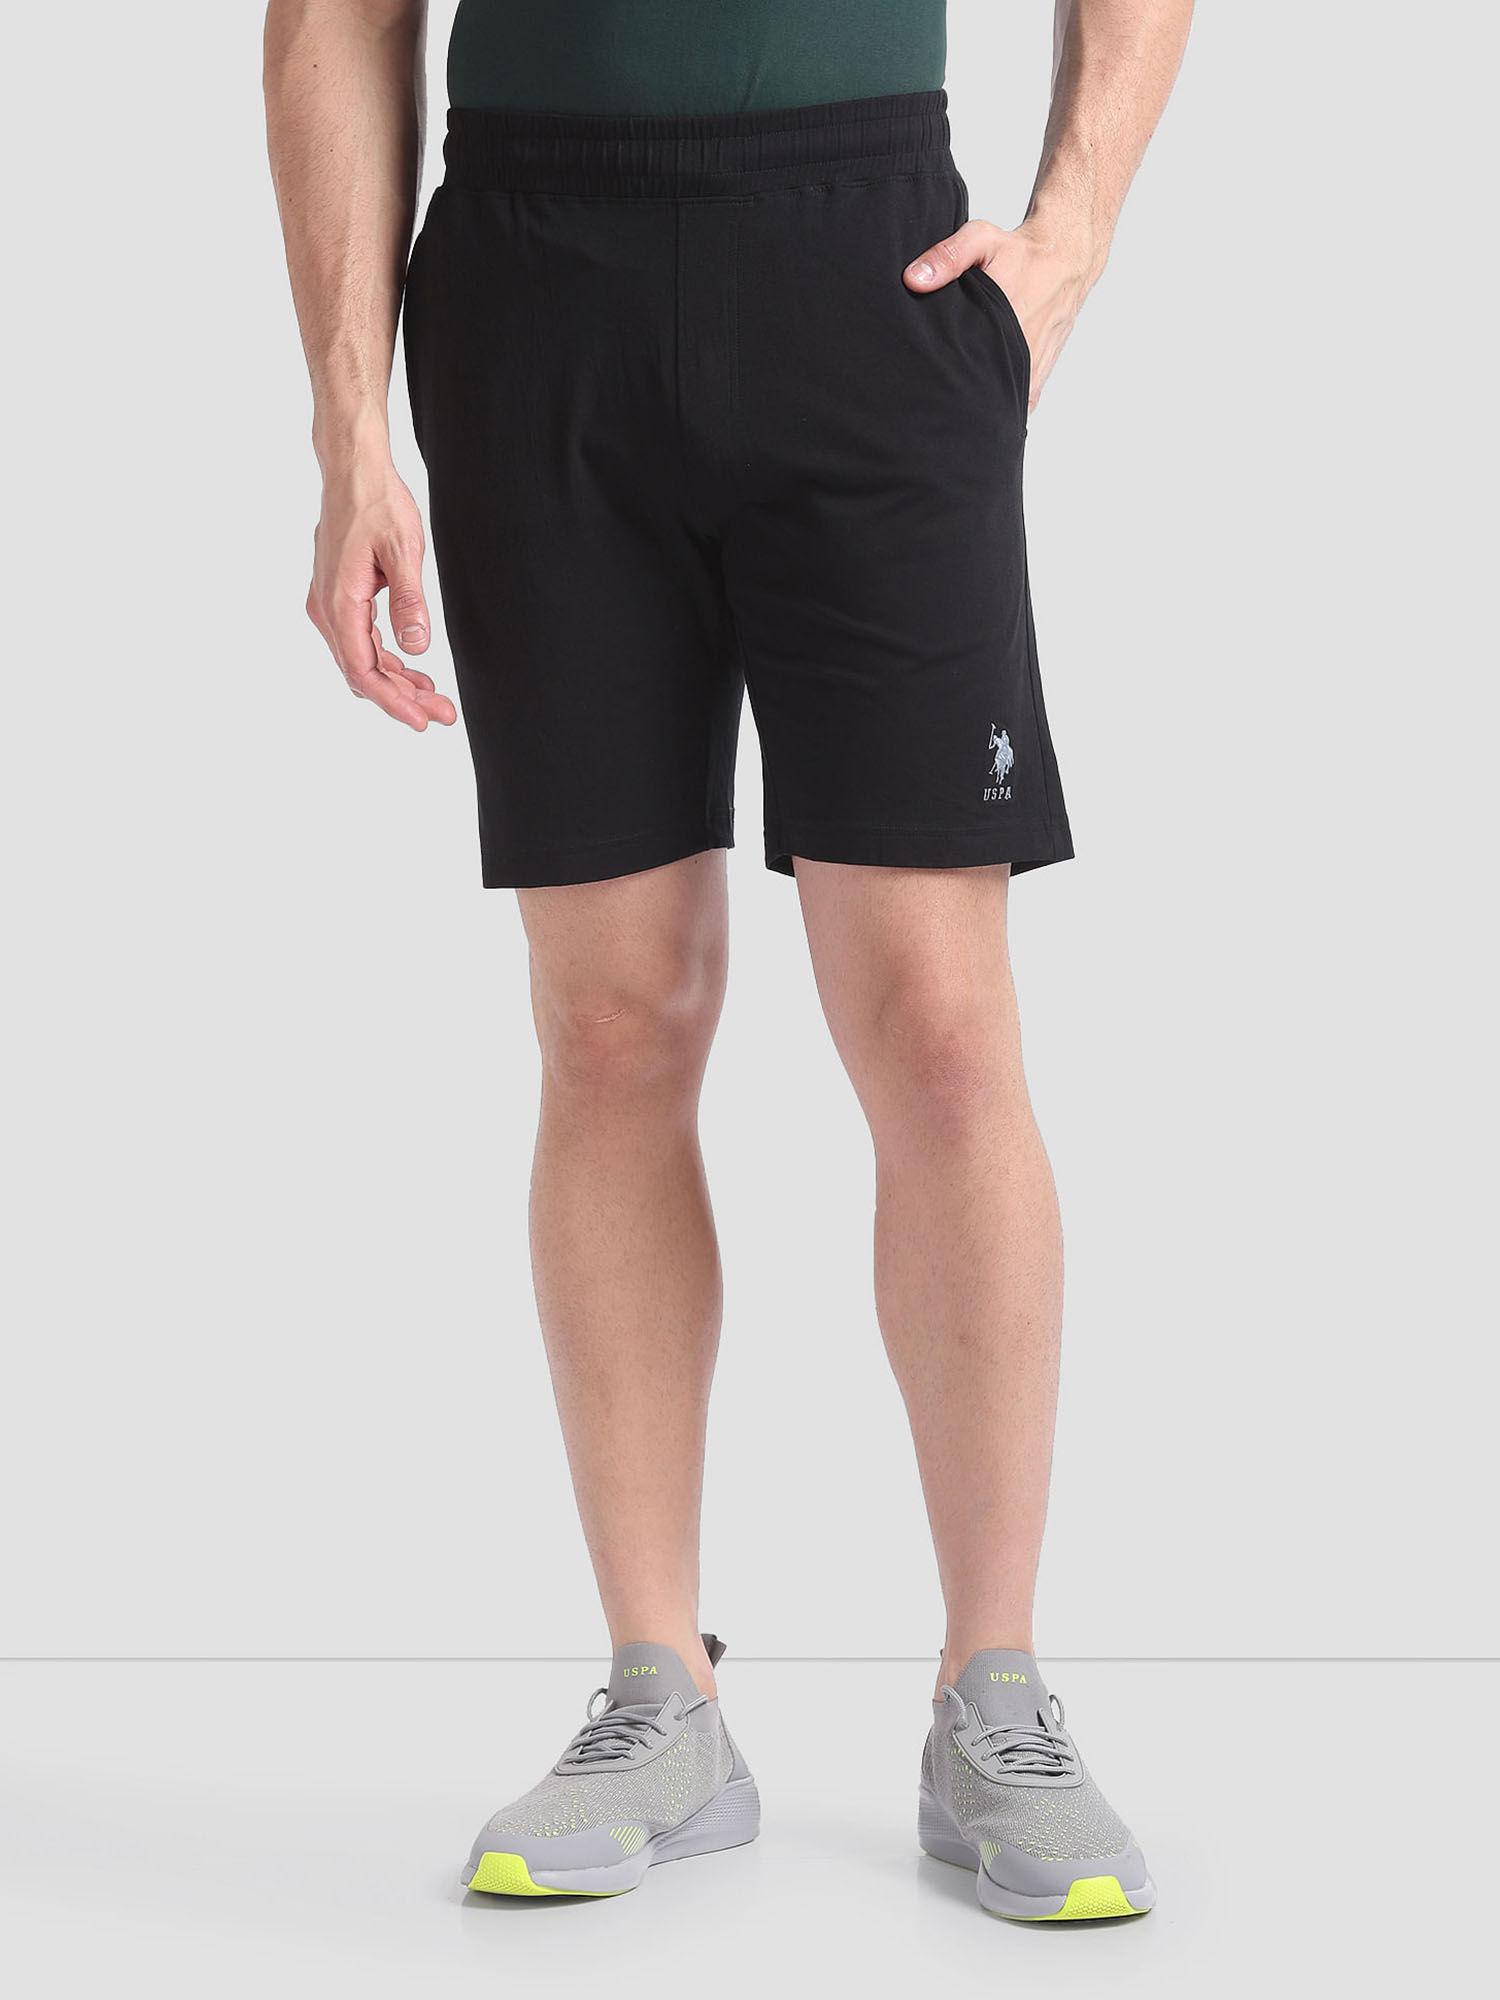 cotton stretch oes01 lounge shorts